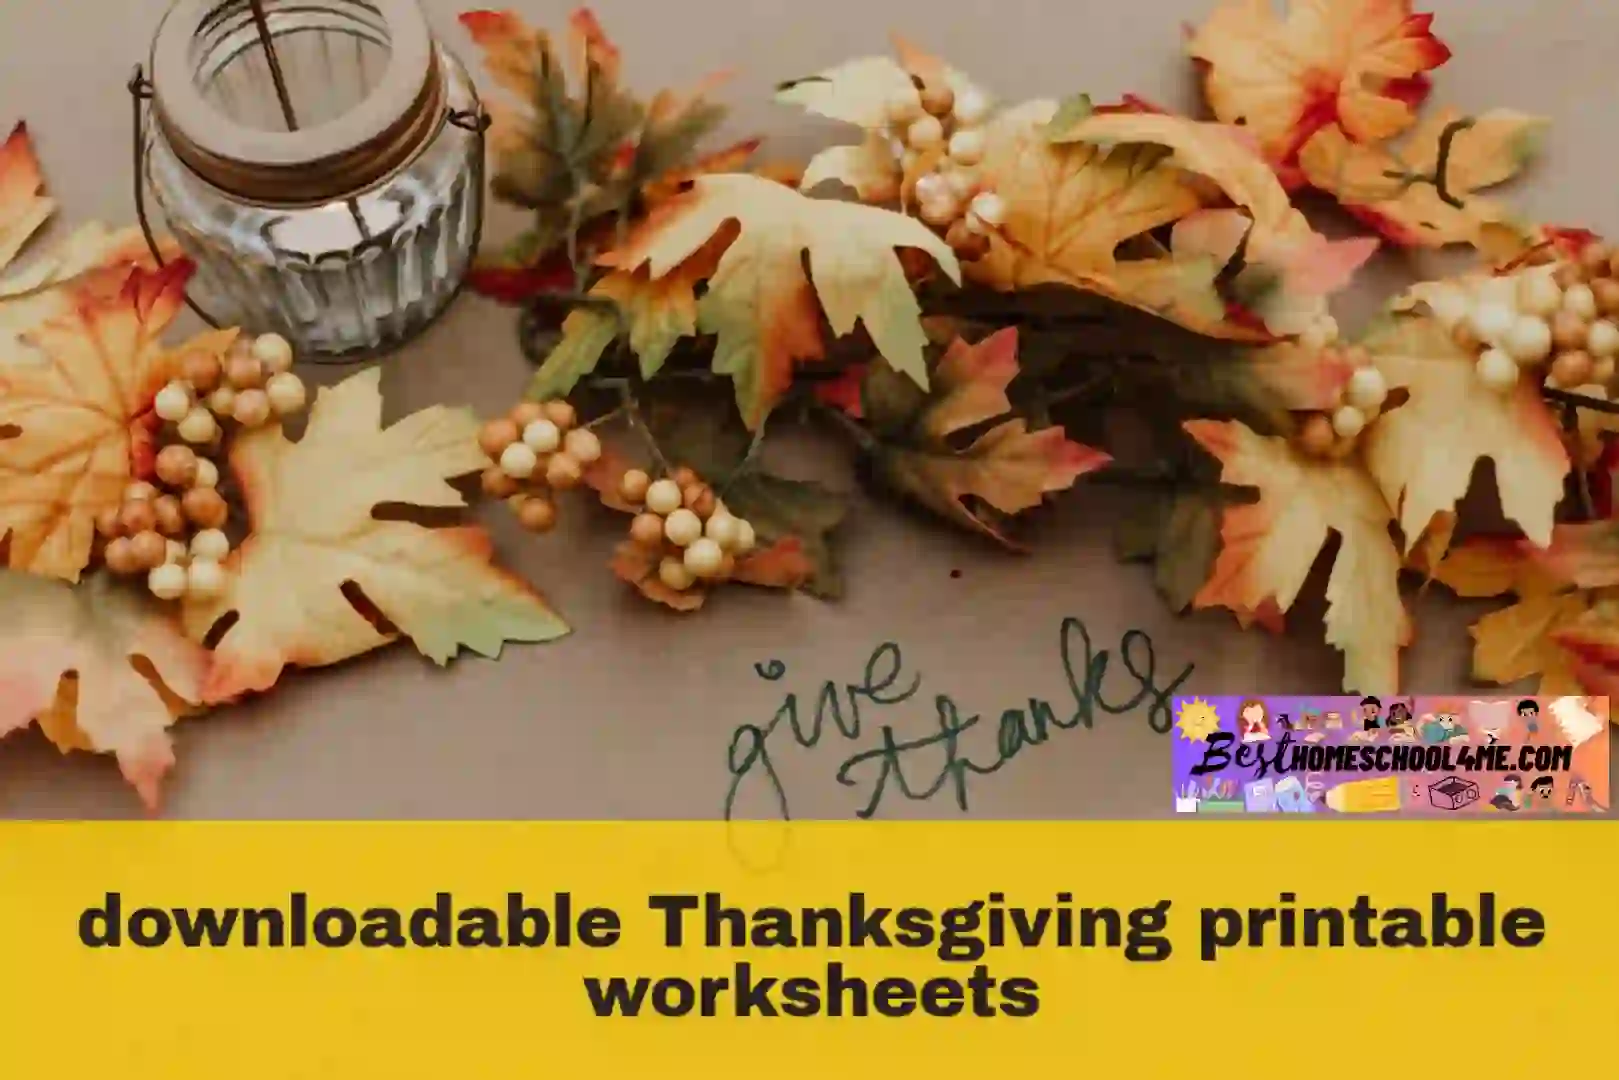 Thanksgiving worksheets for fifth grade homeschool, Thanksgiving worksheets for fifth grade sunday school,